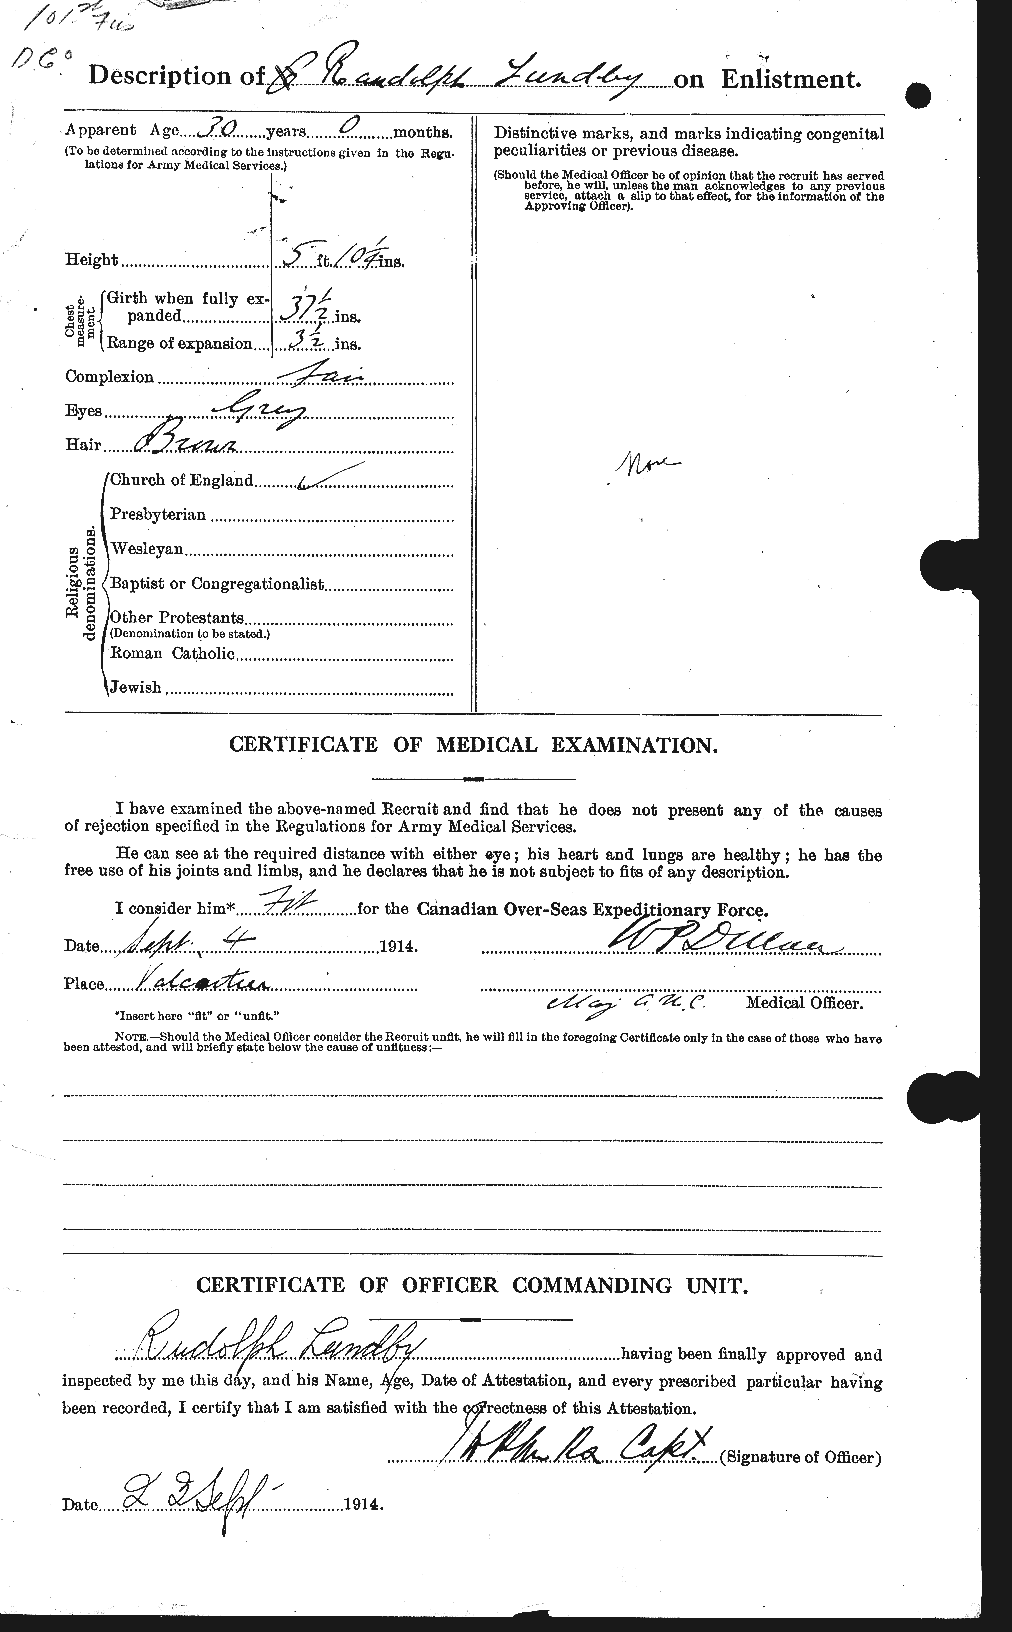 Personnel Records of the First World War - CEF 473272b